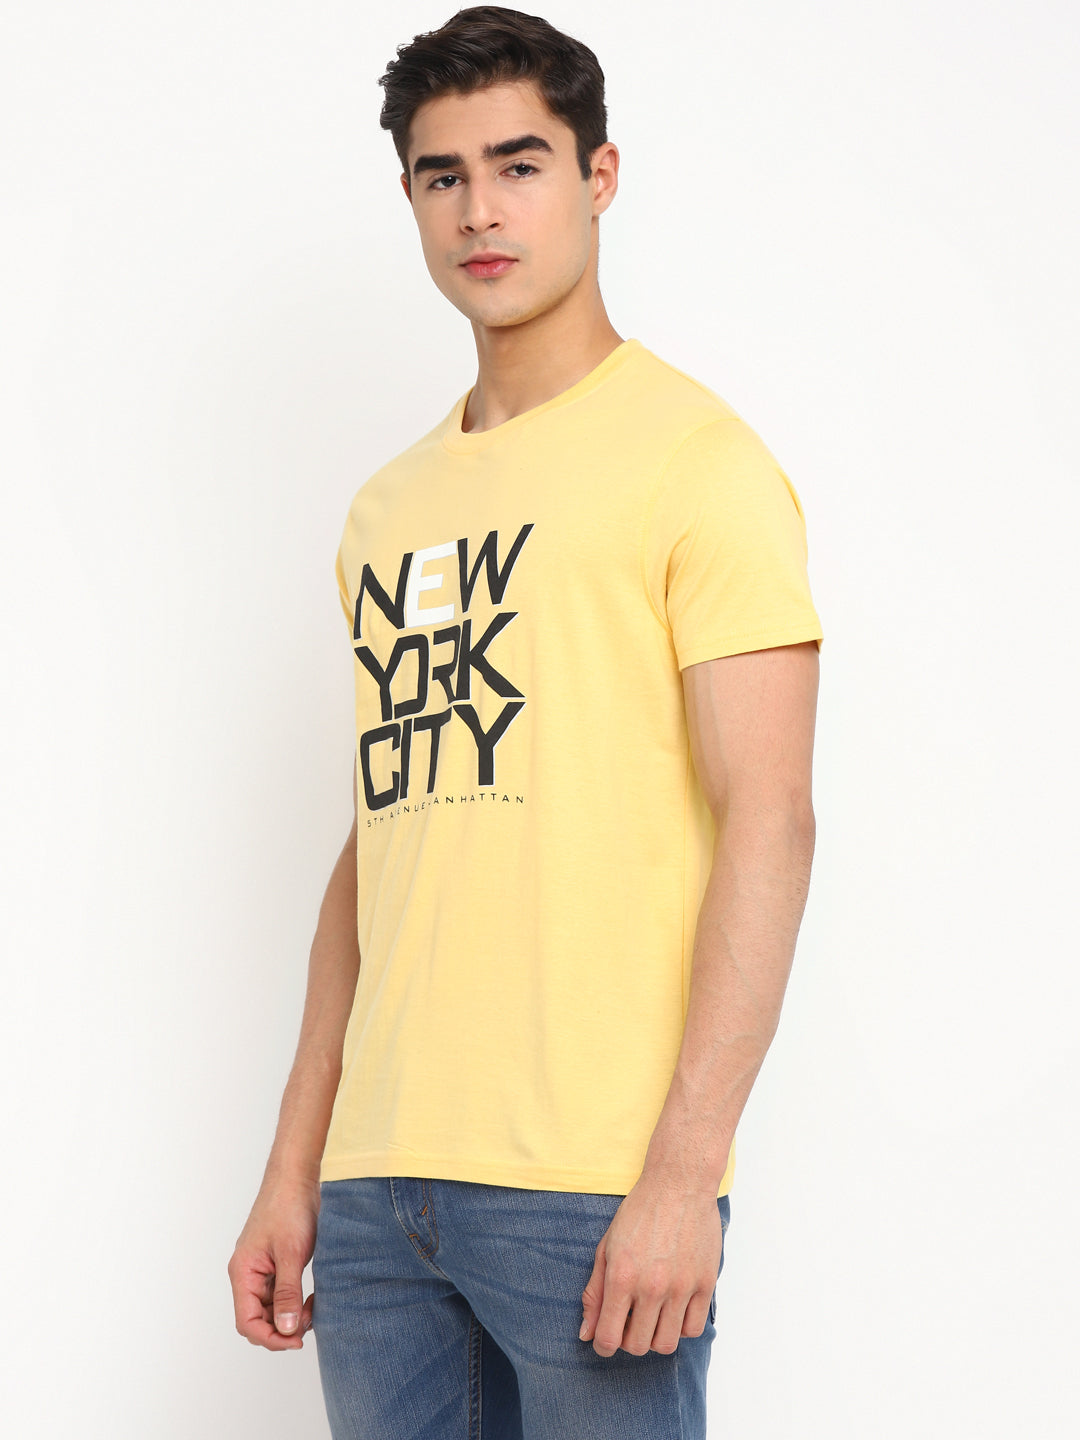 100% Cotton Printed Round Neck T-Shirt For Men - Light Yellow